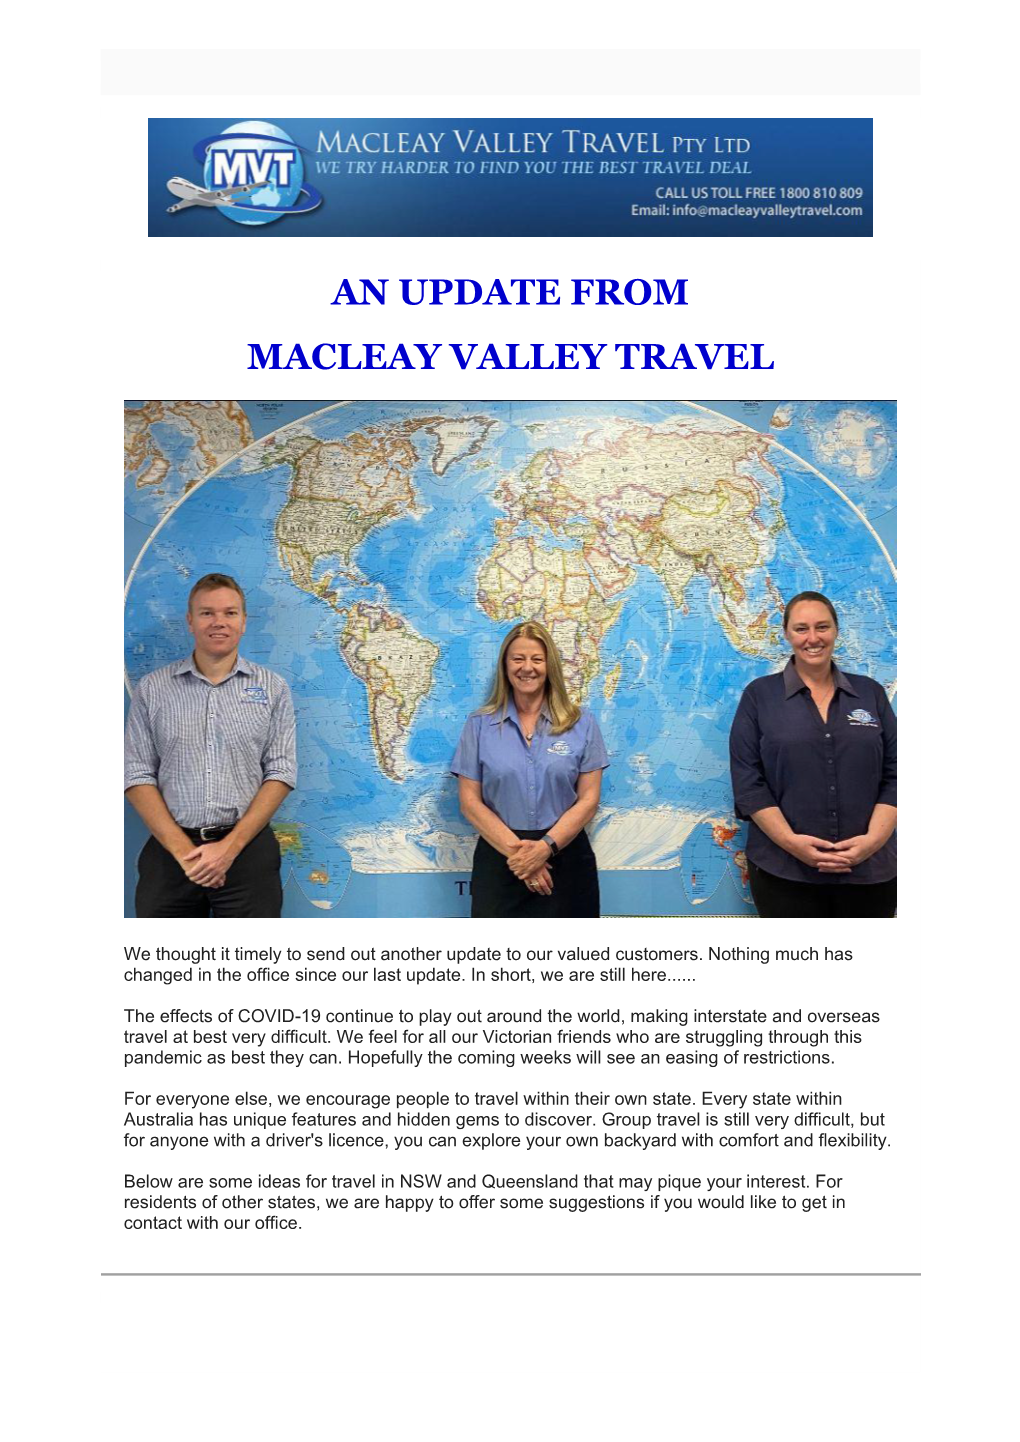 Please Click Here to View the September 2020 Update from Macleay Valley